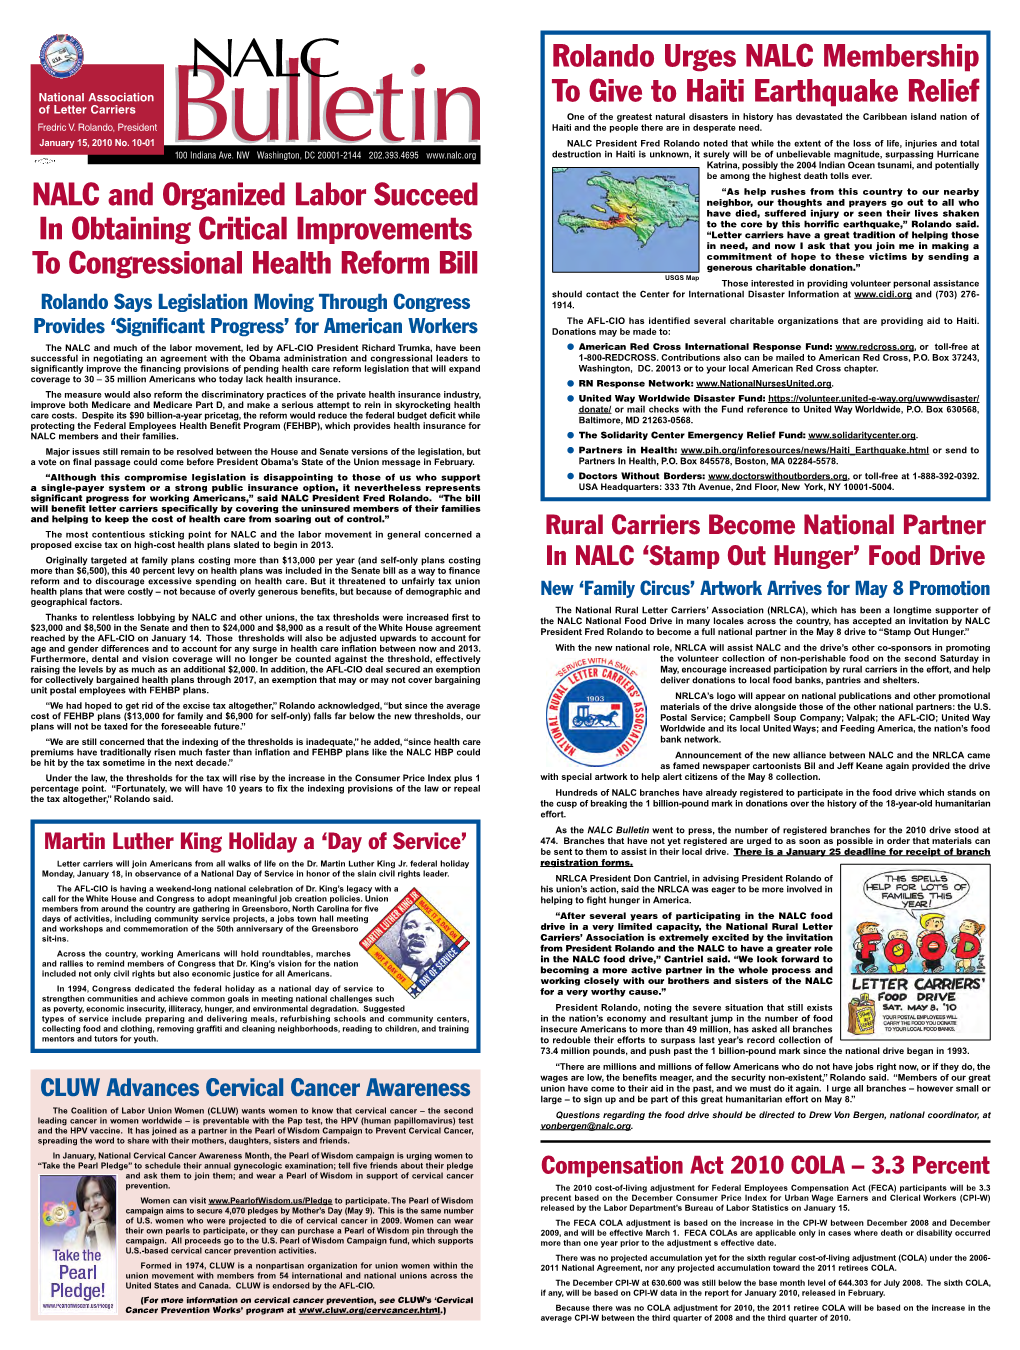 NALC and Organized Labor Succeed in Obtaining Critical Improvements